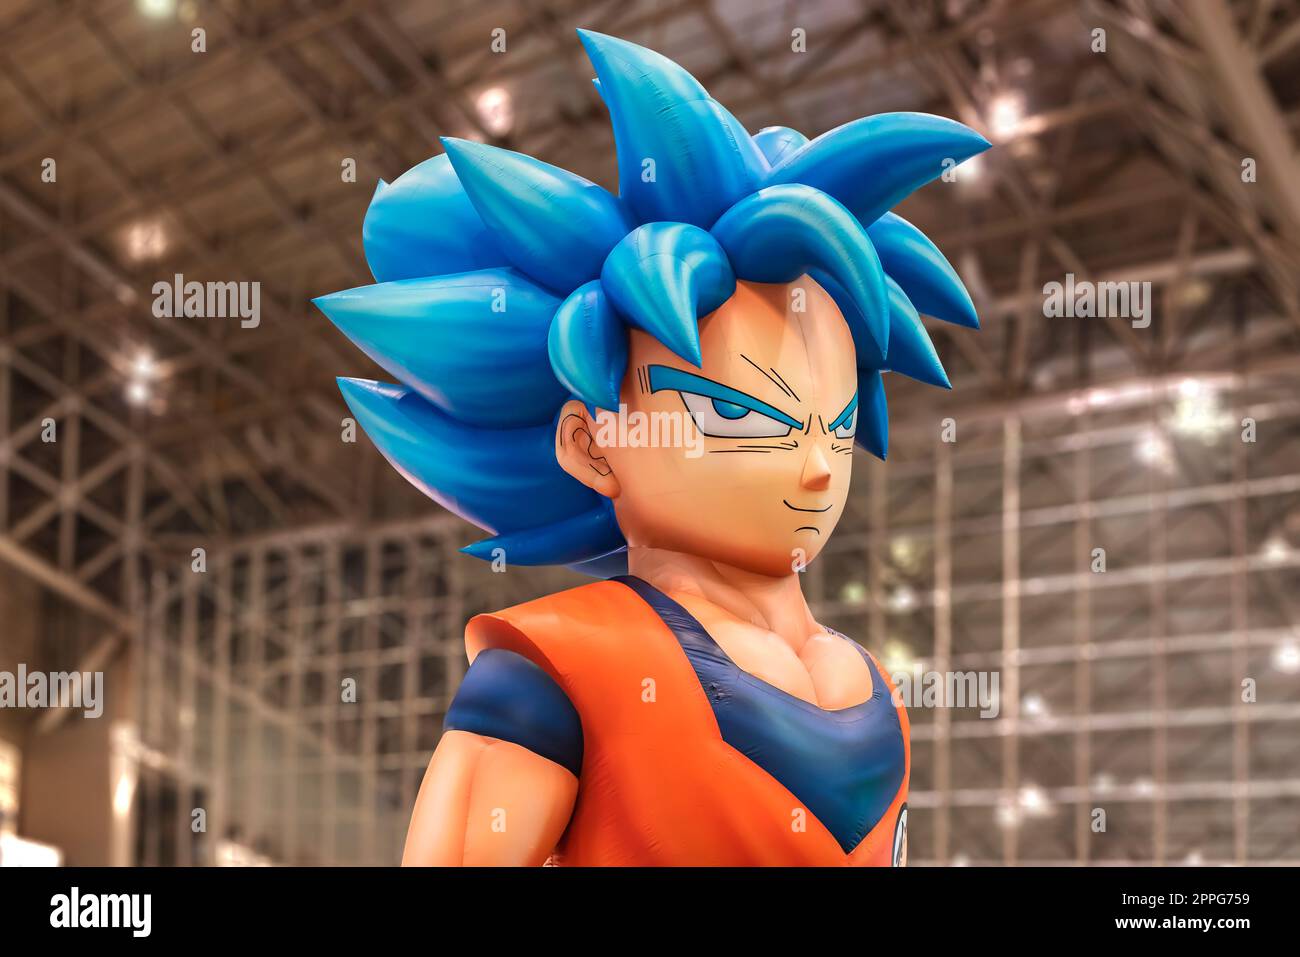 chiba, japan - december 22 2018: Huge inflatable structure of the bust of Son Goku character from the anime and manga serie of Dragon Ball floating under the ceiling of the anime convention Jump Festa Stock Photo